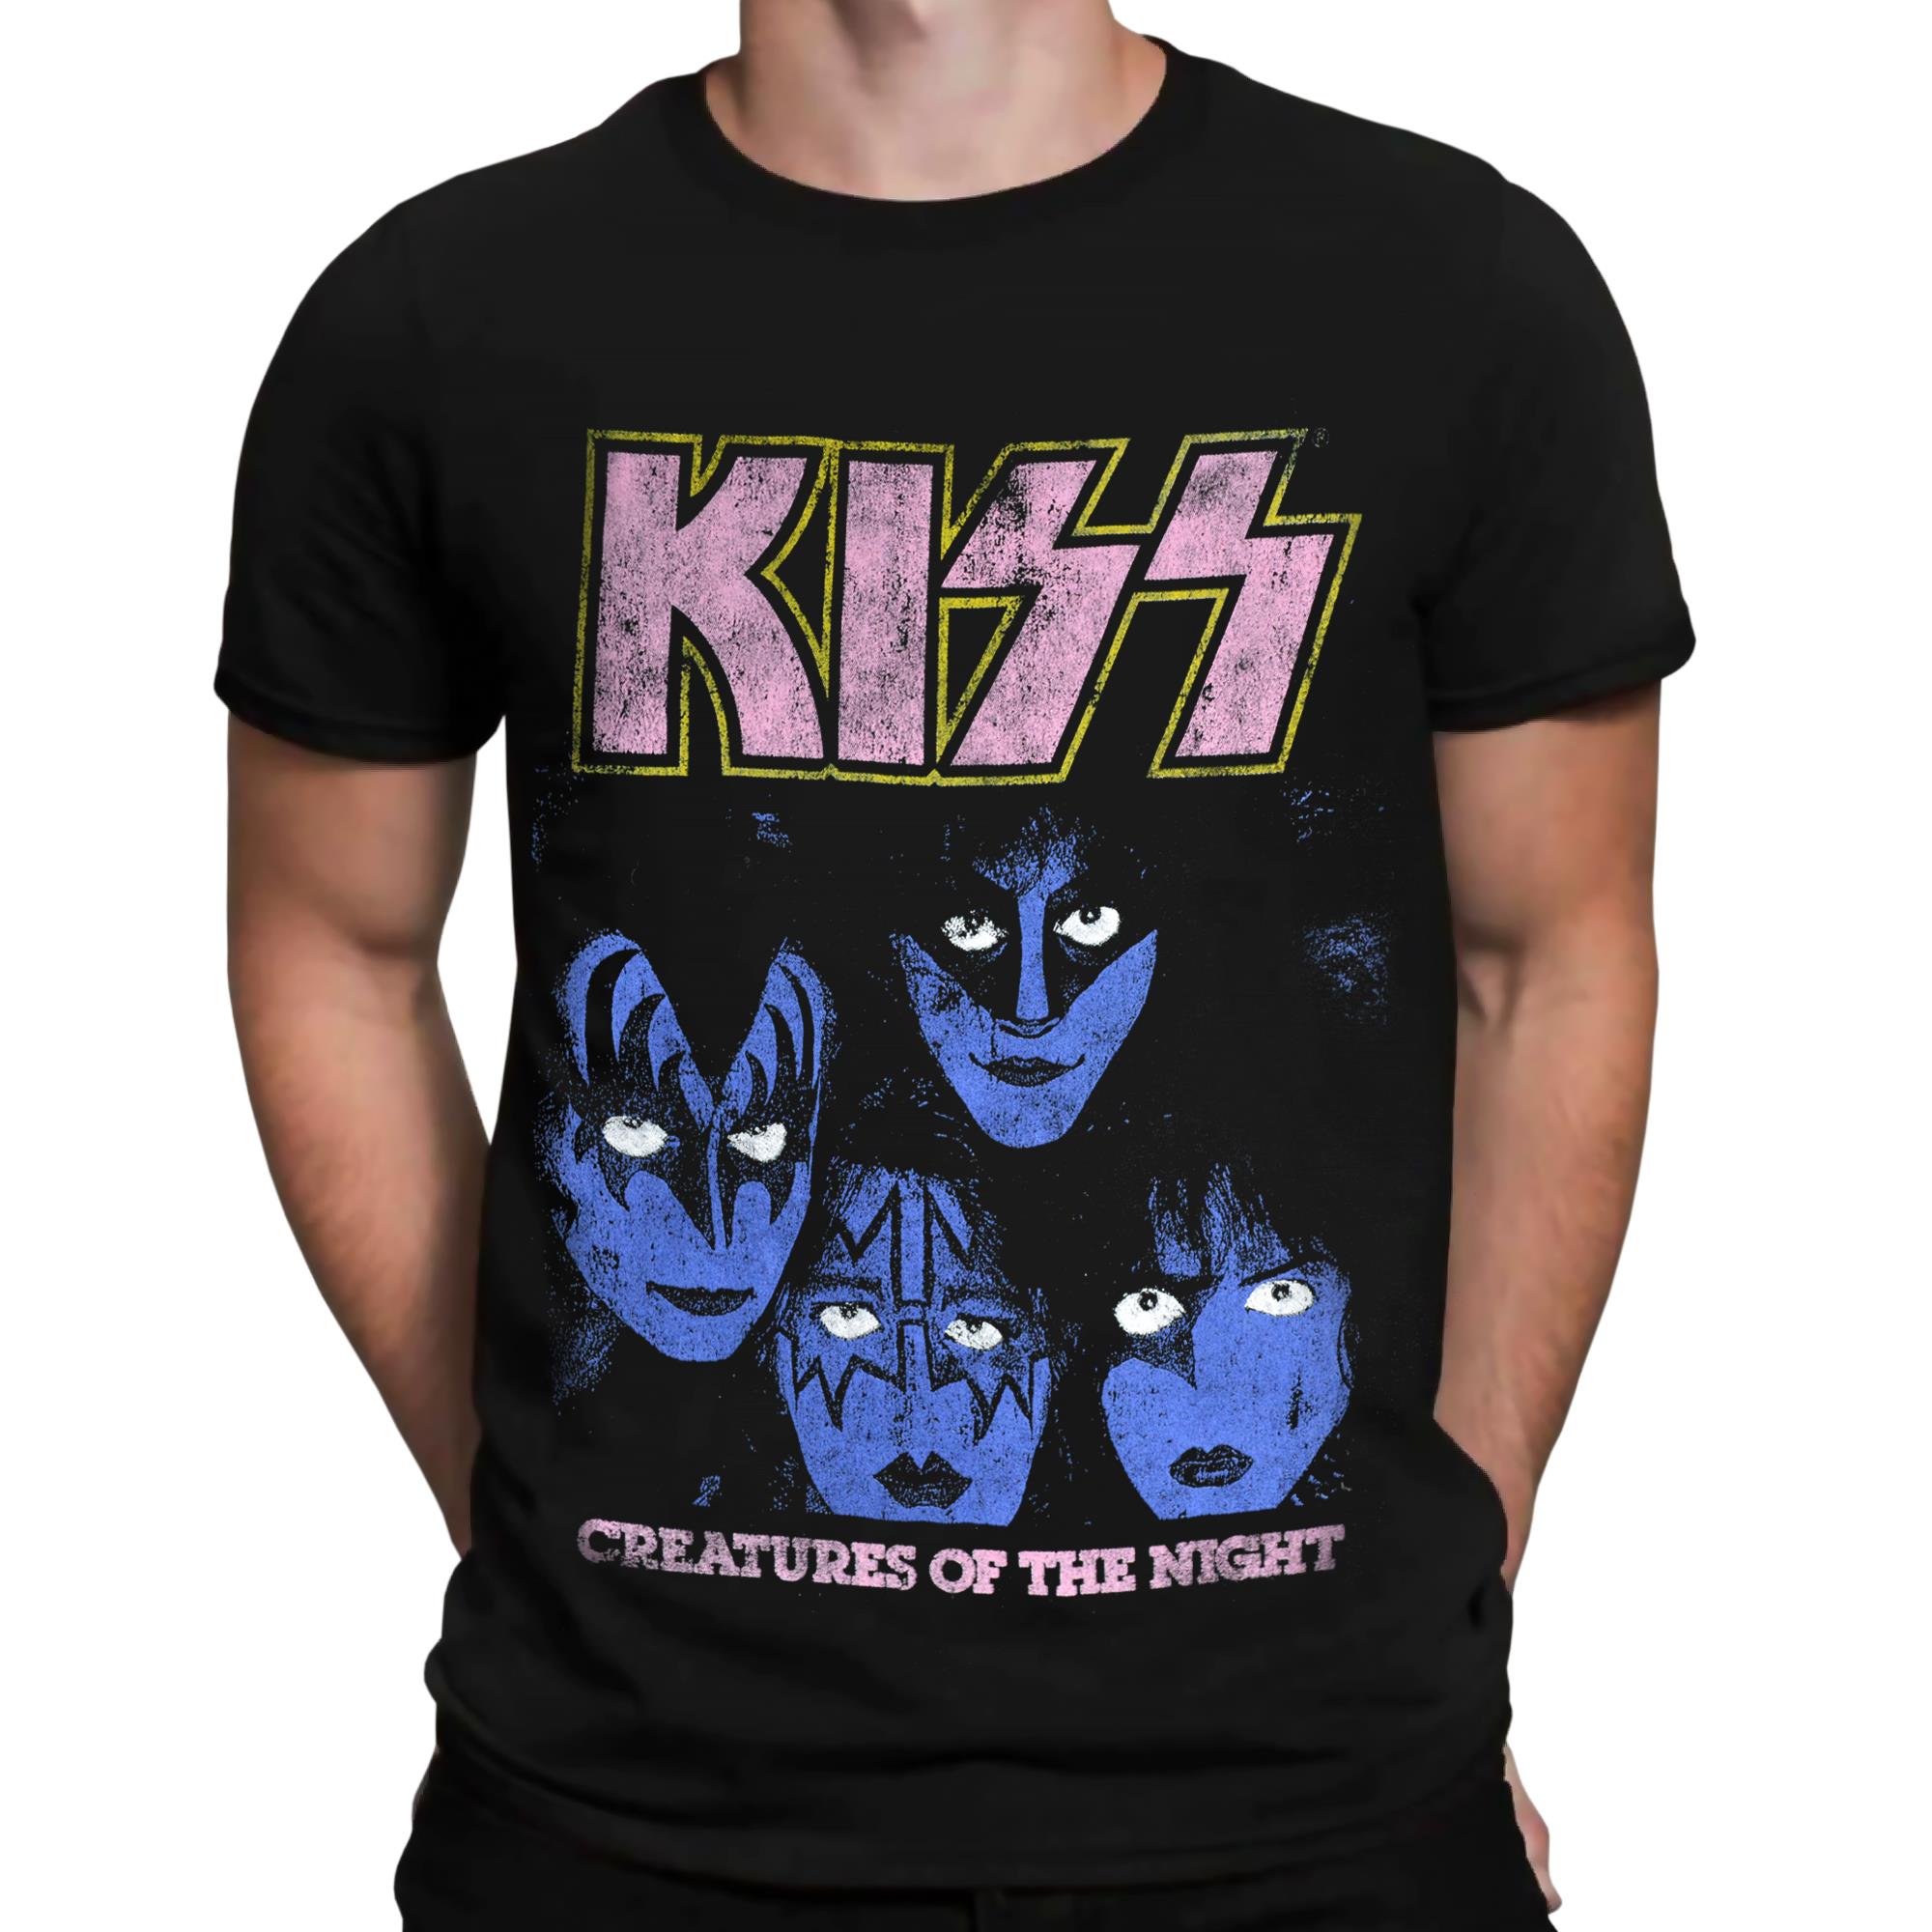 Creatures of the Night T-Shirt